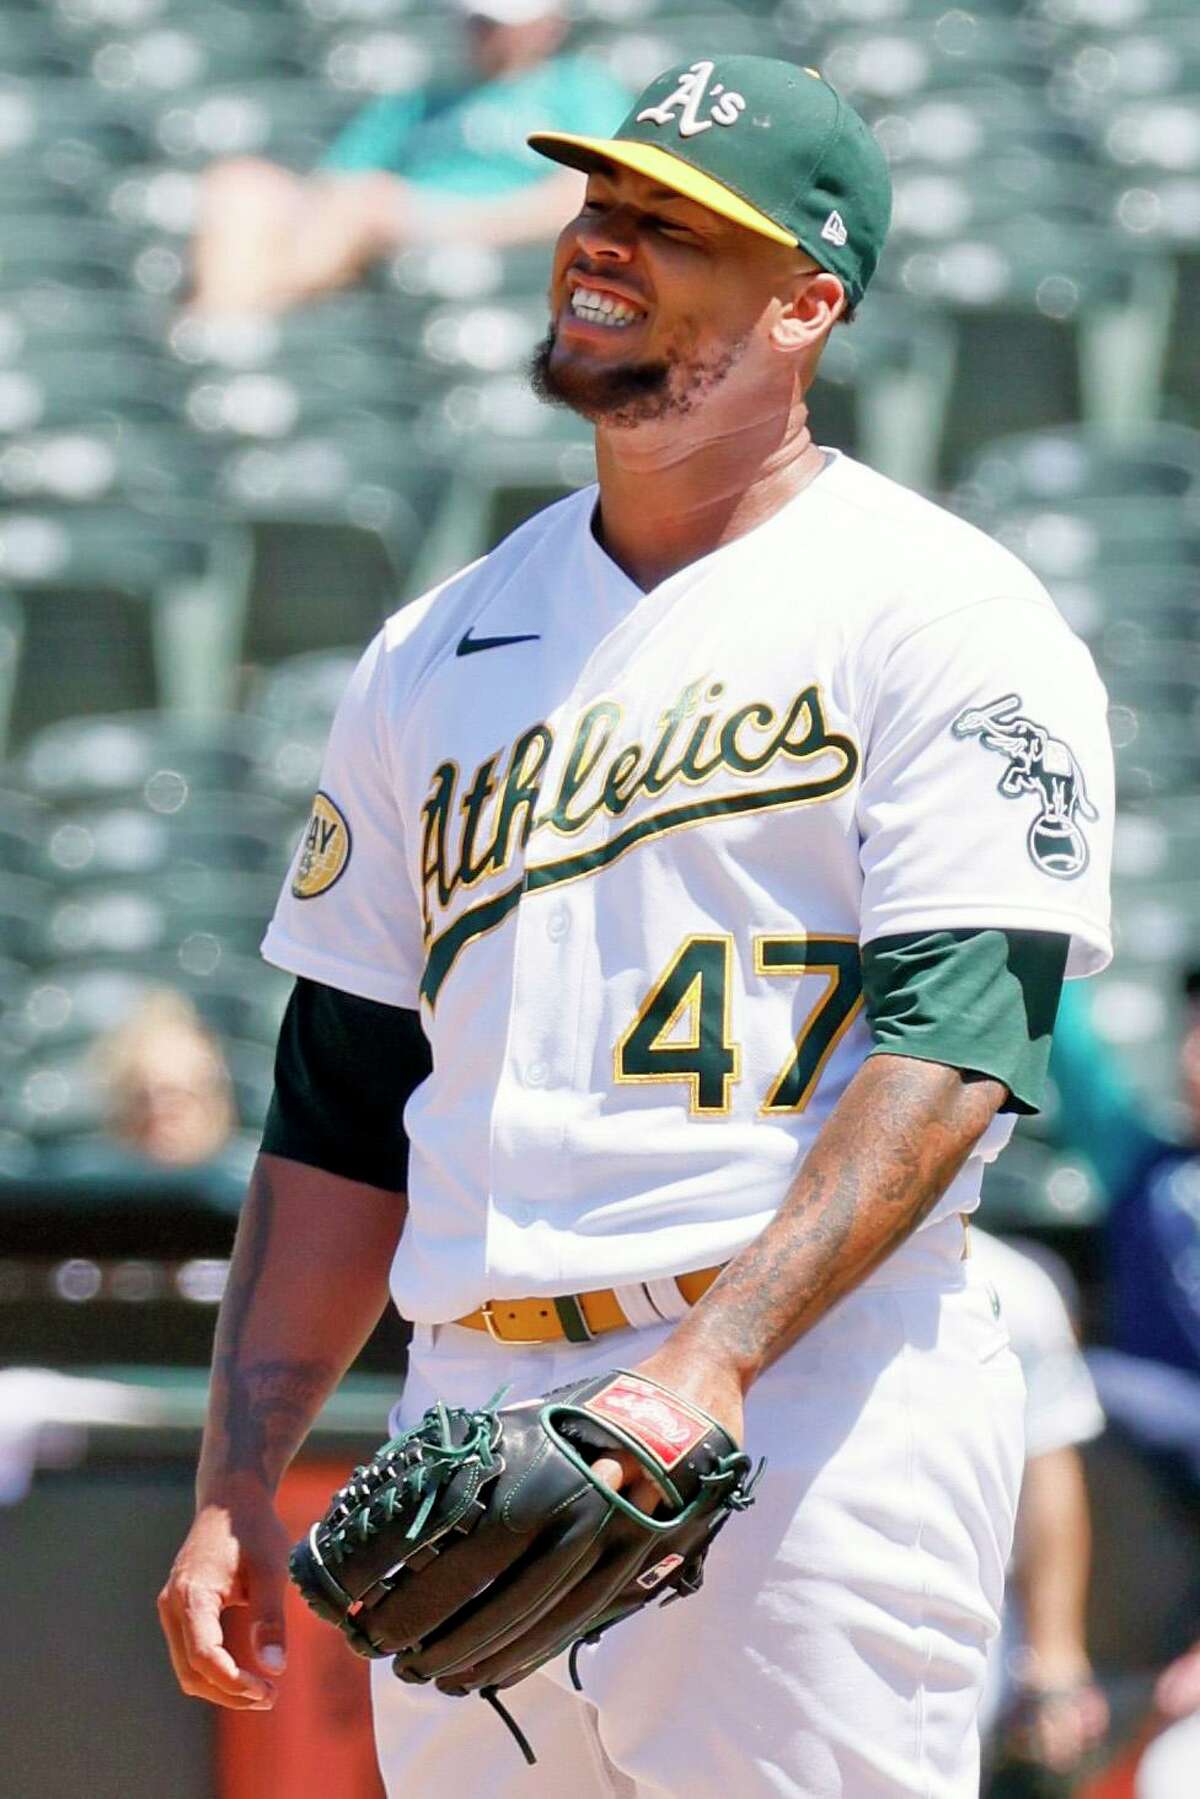 Oakland Athletics starting pitcher Frankie Montas (47) reacts after giving up his first hit in the eighth inning during an MLB game against the Seattle Mariners at RingCentral Coliseum, Thursday, June 23, 2022, in Oakland, Calif.